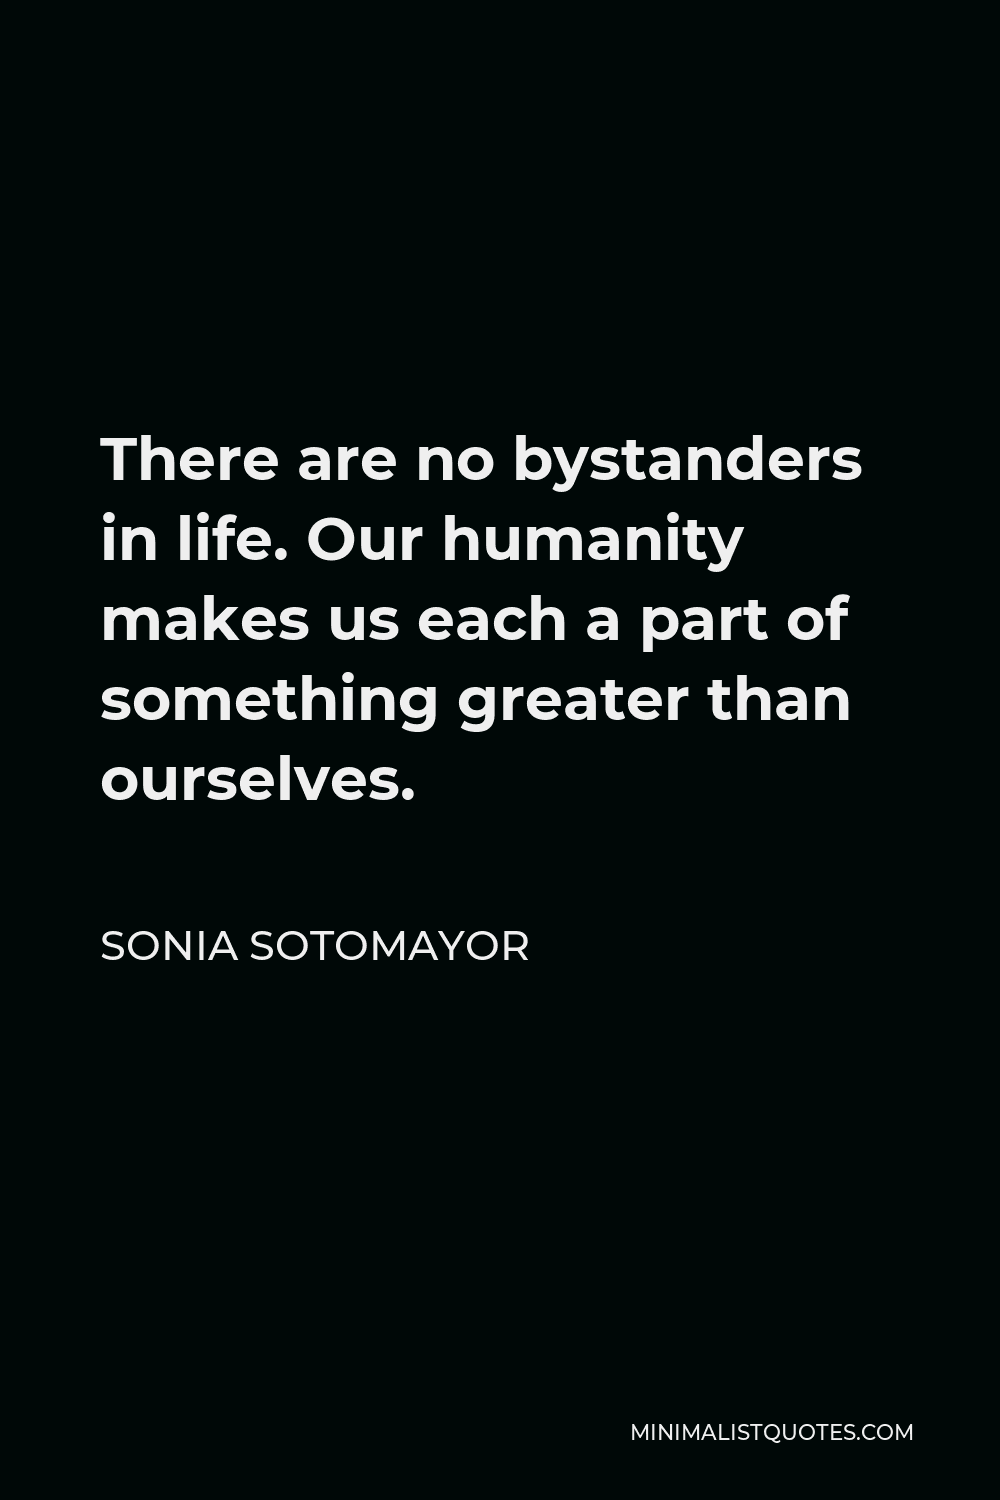 Sonia Sotomayor Quote - There are no bystanders in life. Our humanity makes us each a part of something greater than ourselves.